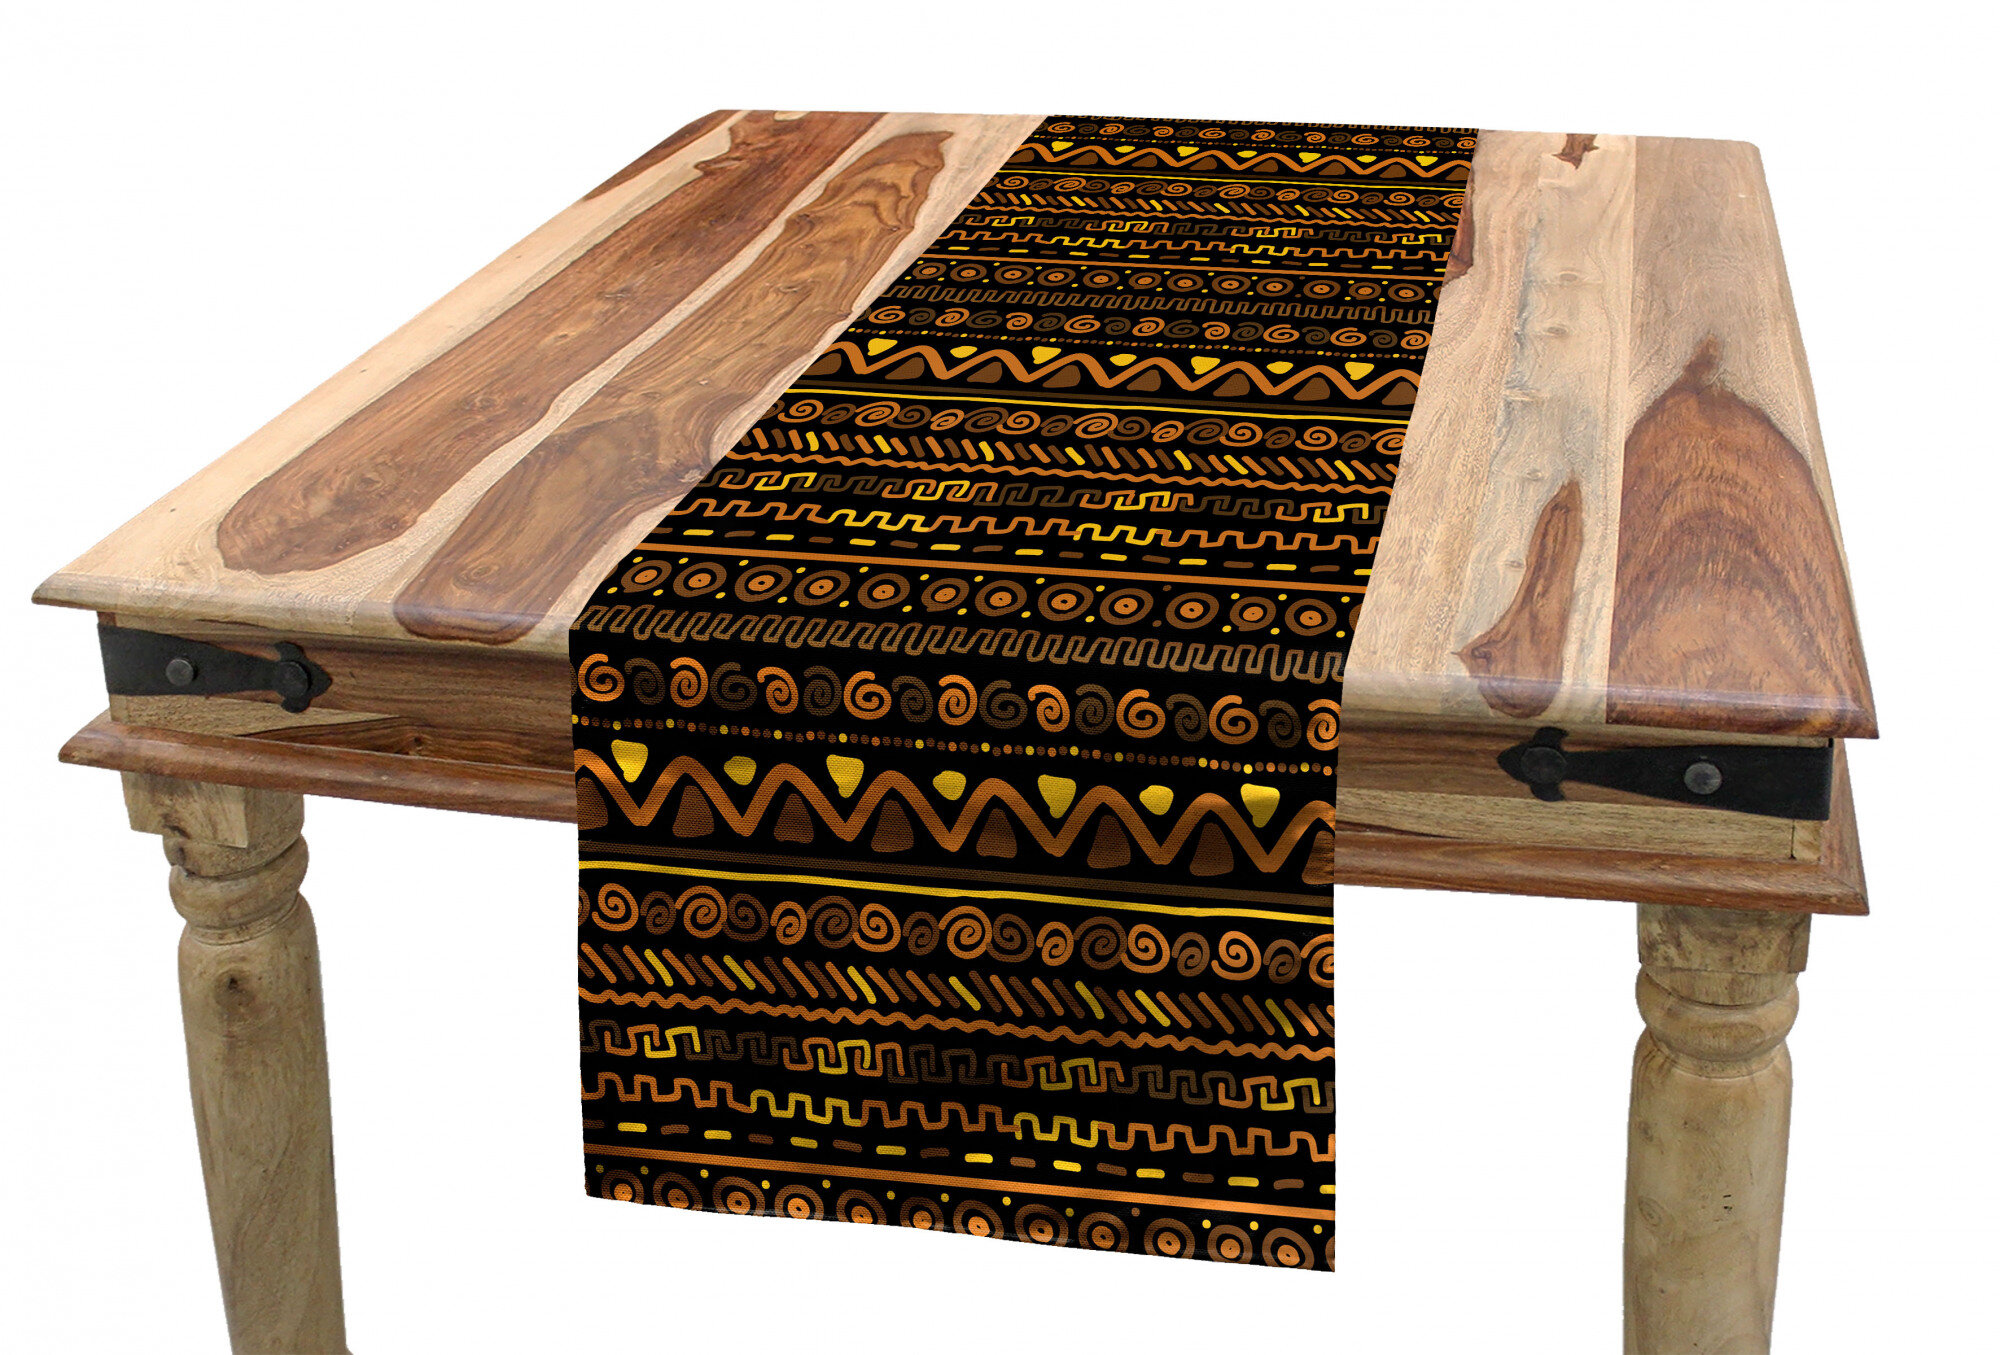 Details about   AFRICAN ETHNIC CHIC POLKA DOT TABLE RUNNER BLACK 